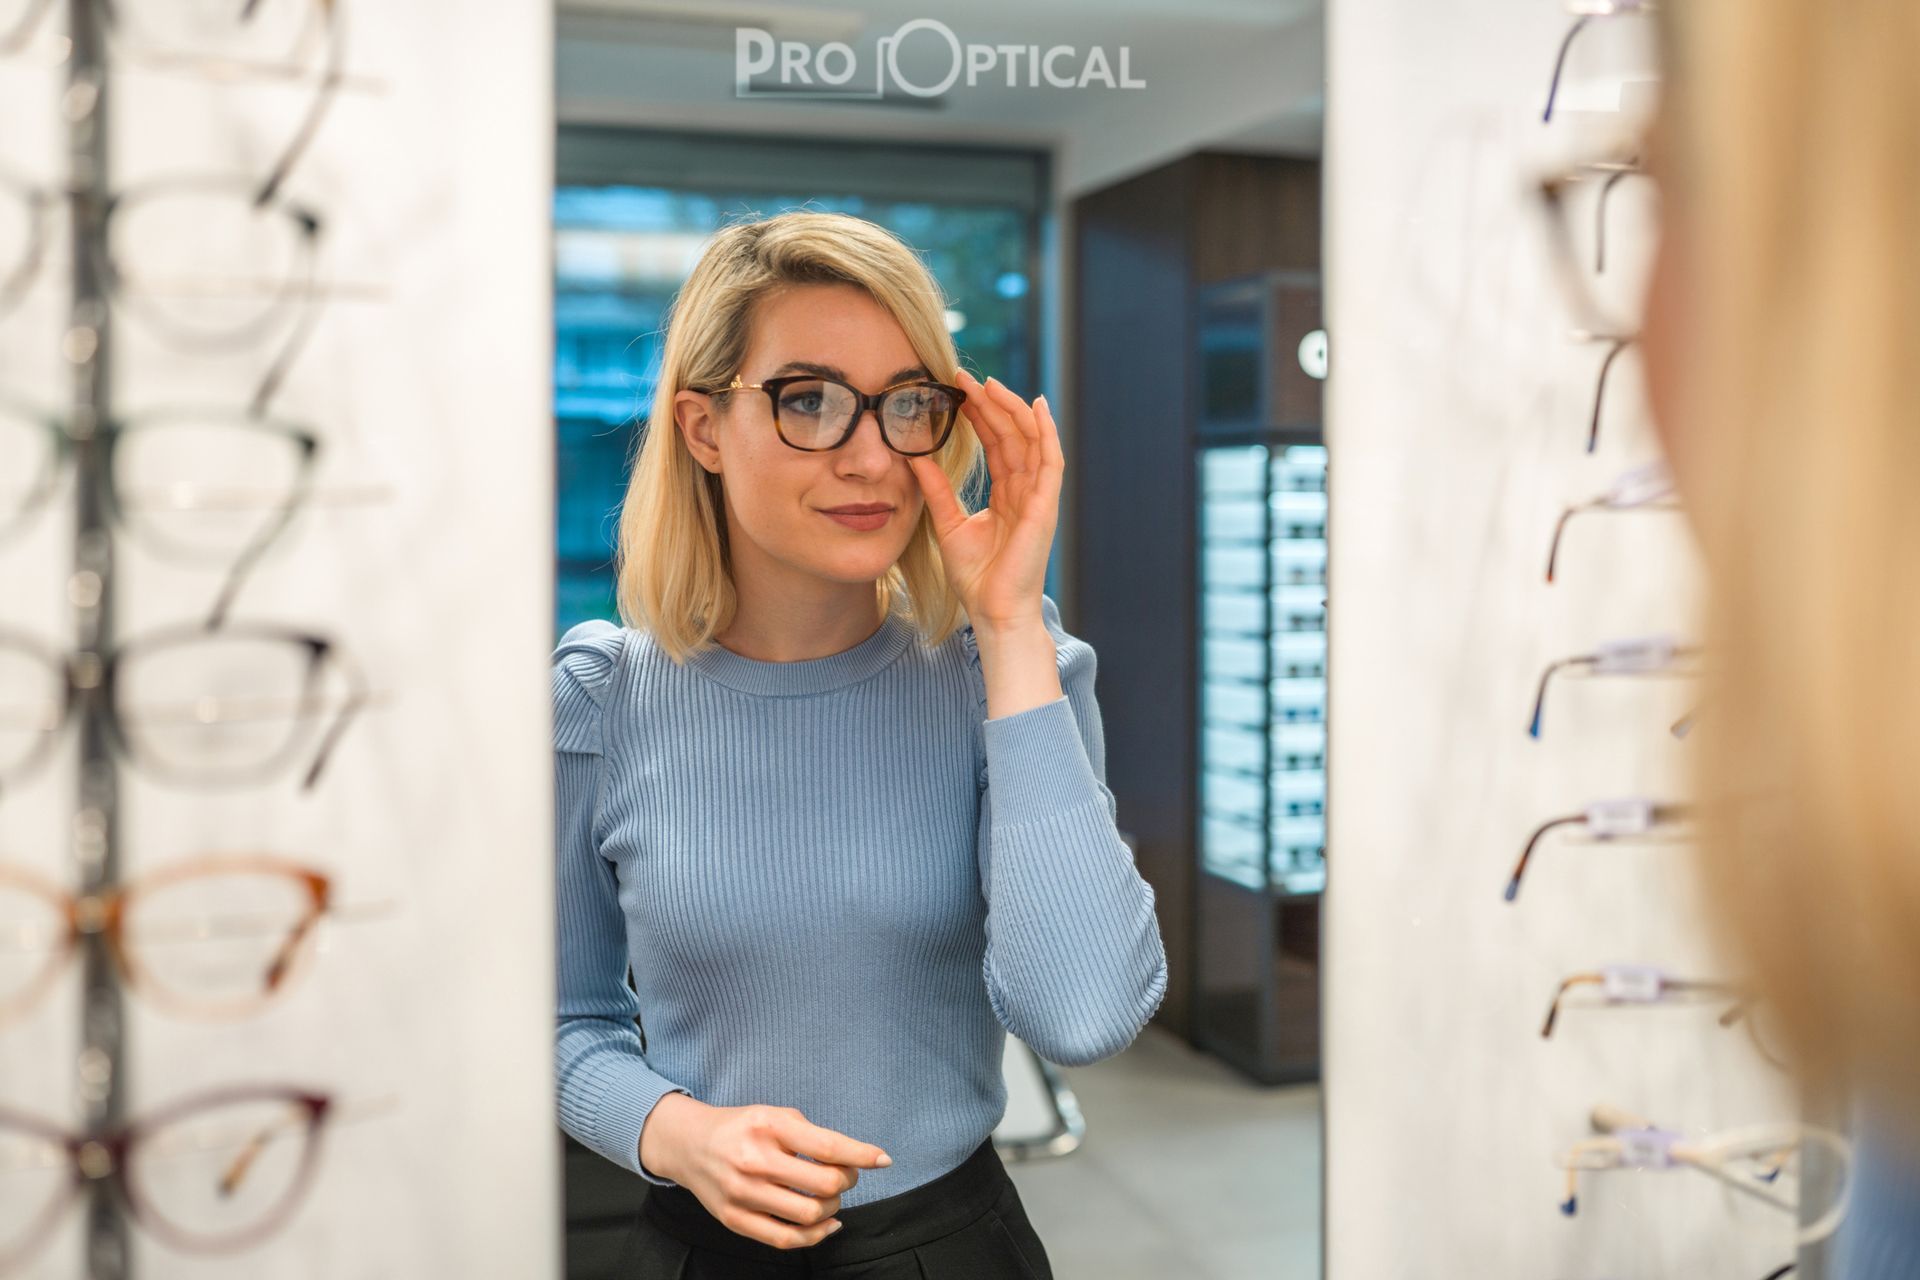 Experience the Speed and Quality of Pro Optical's Same Day Eyeglasses in the Upper Valley